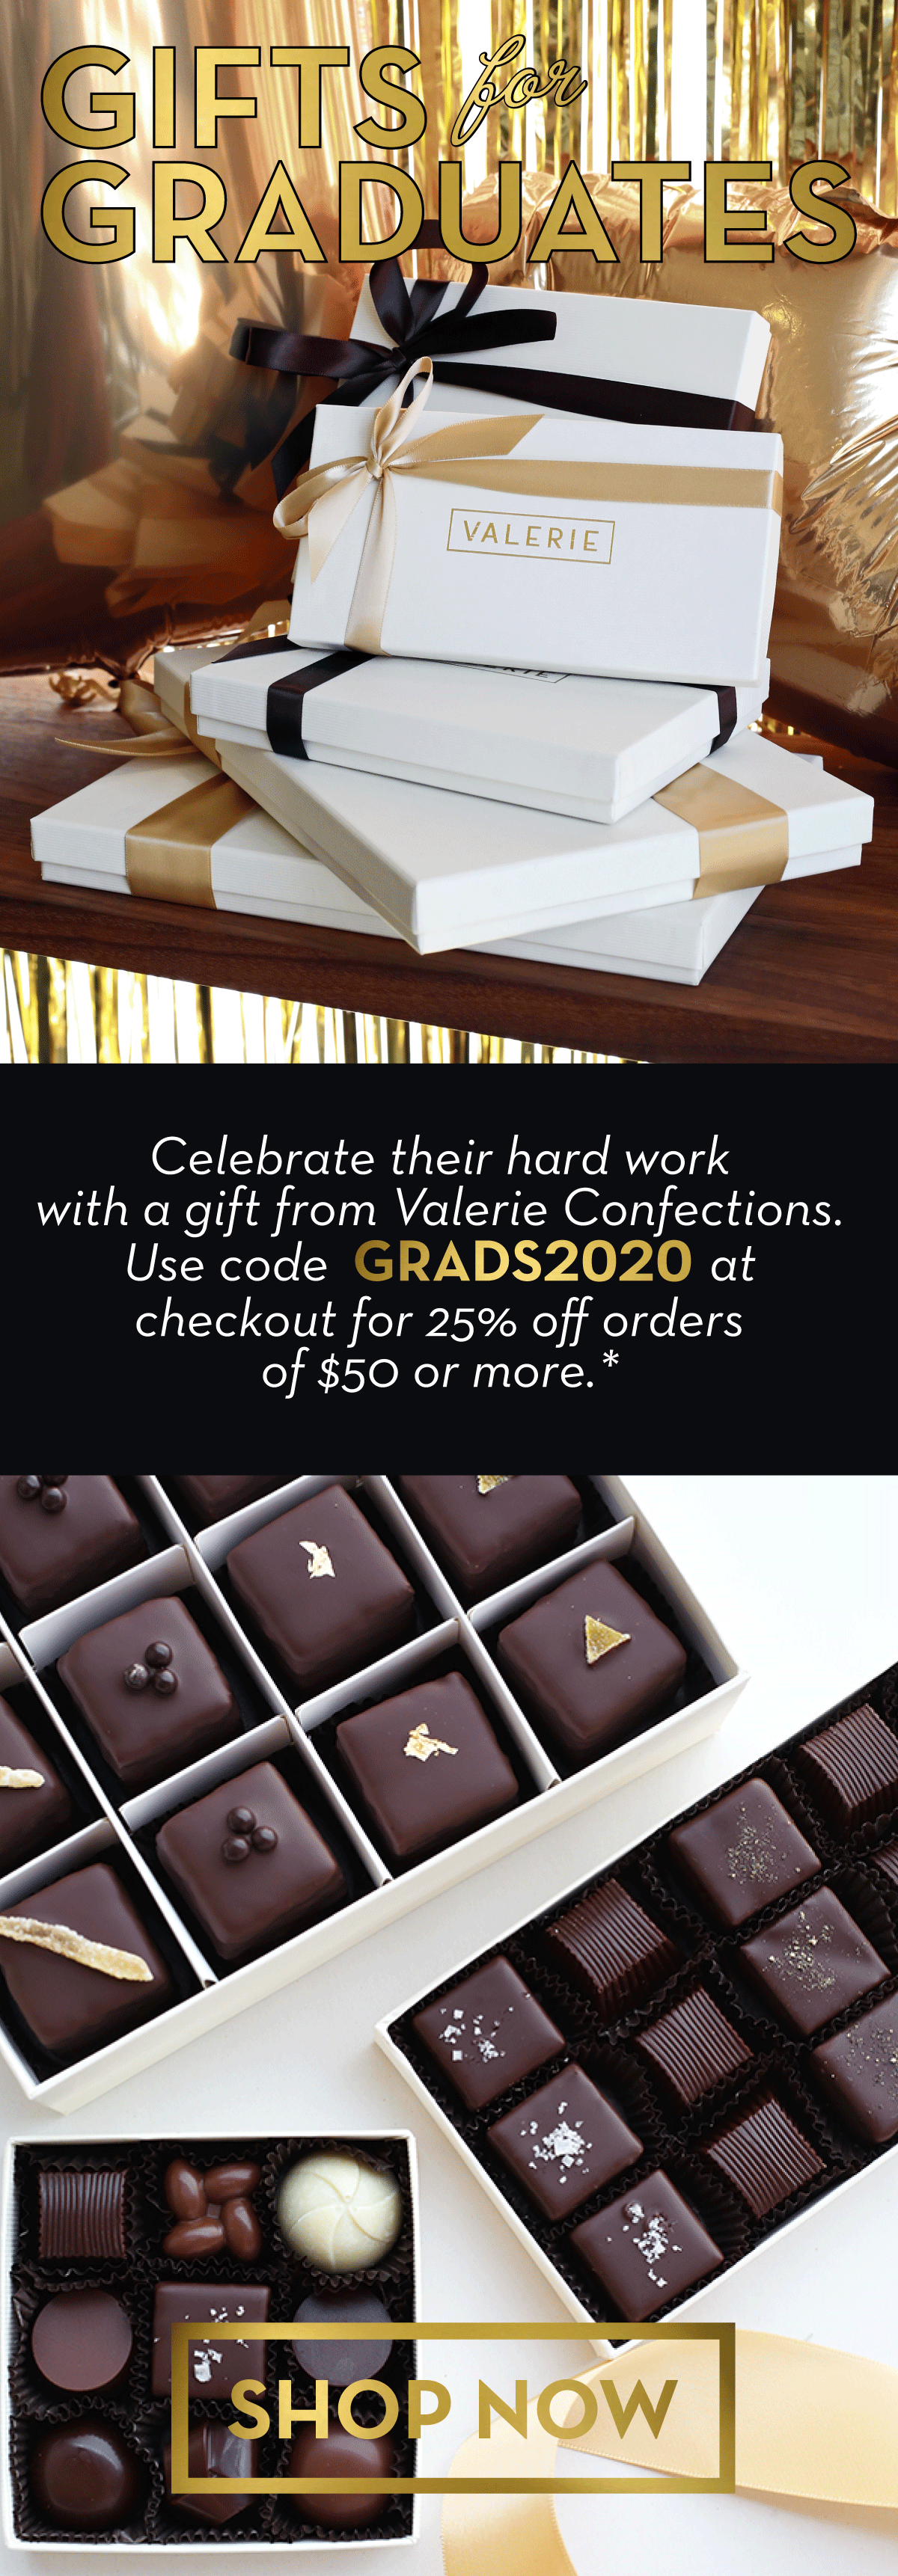 Celebrate their hard work with a gift from Valerie Confections. Use code GRADS2020 at checkout for 25% off orders of $50 or more.*